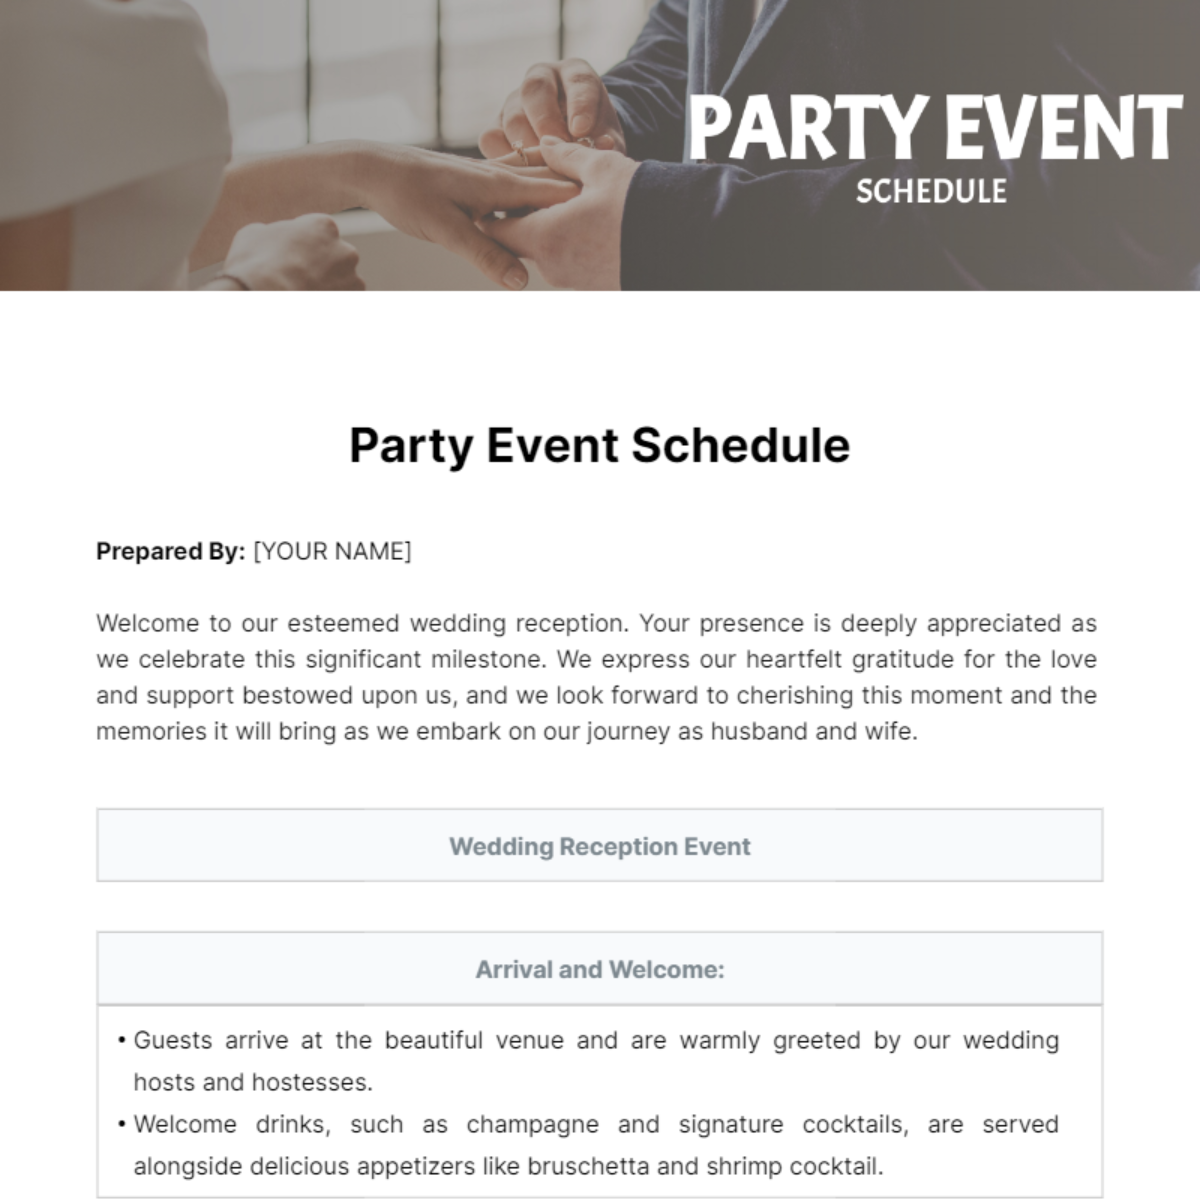 Party Event Schedule Template